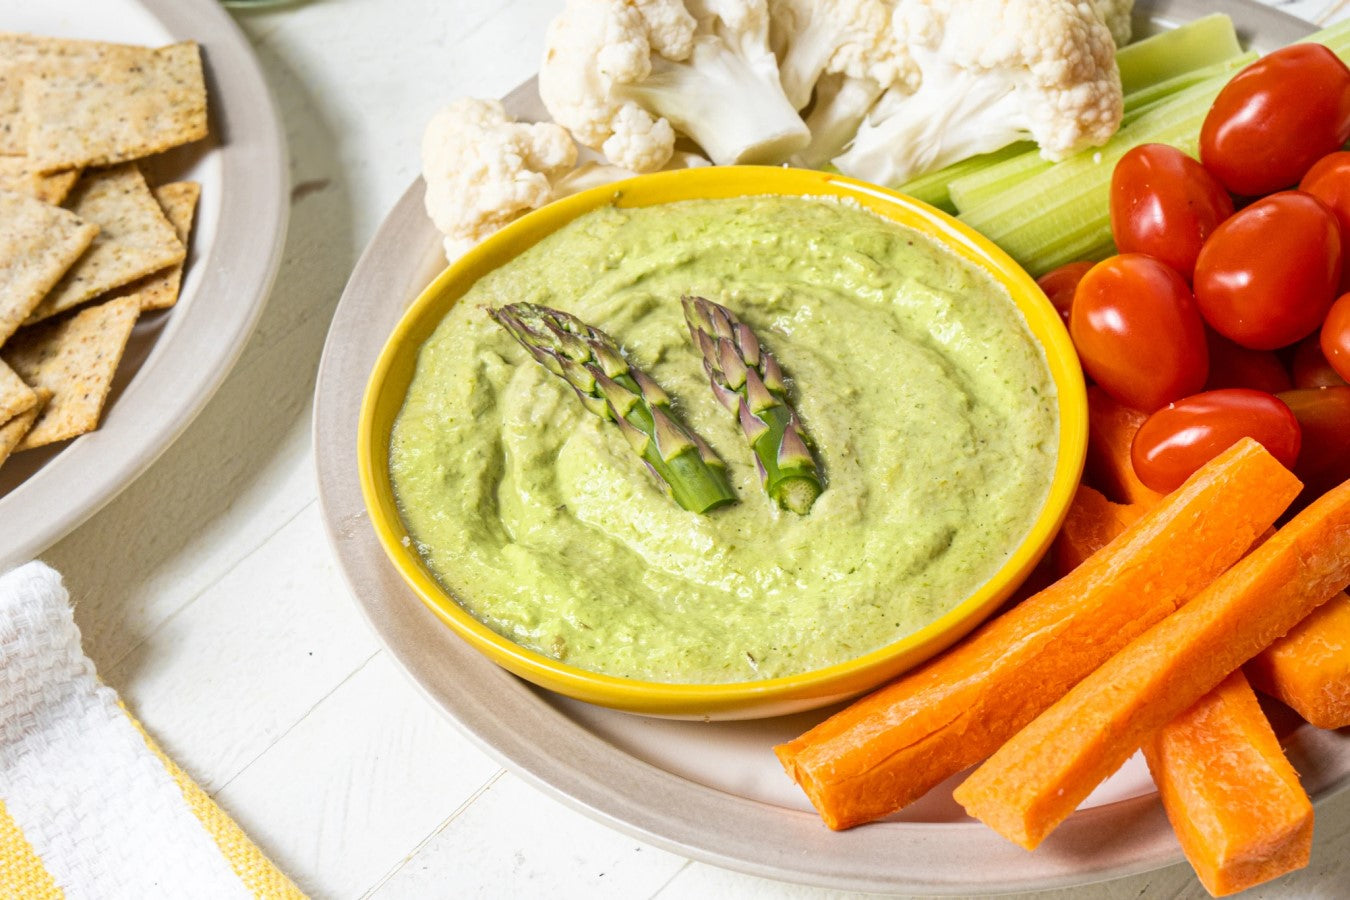 Avocado Oil Asparagus Dip With Crackers And Fresh Cauliflower Celery Tomatoes Carrots Recipe Primal Kitchen